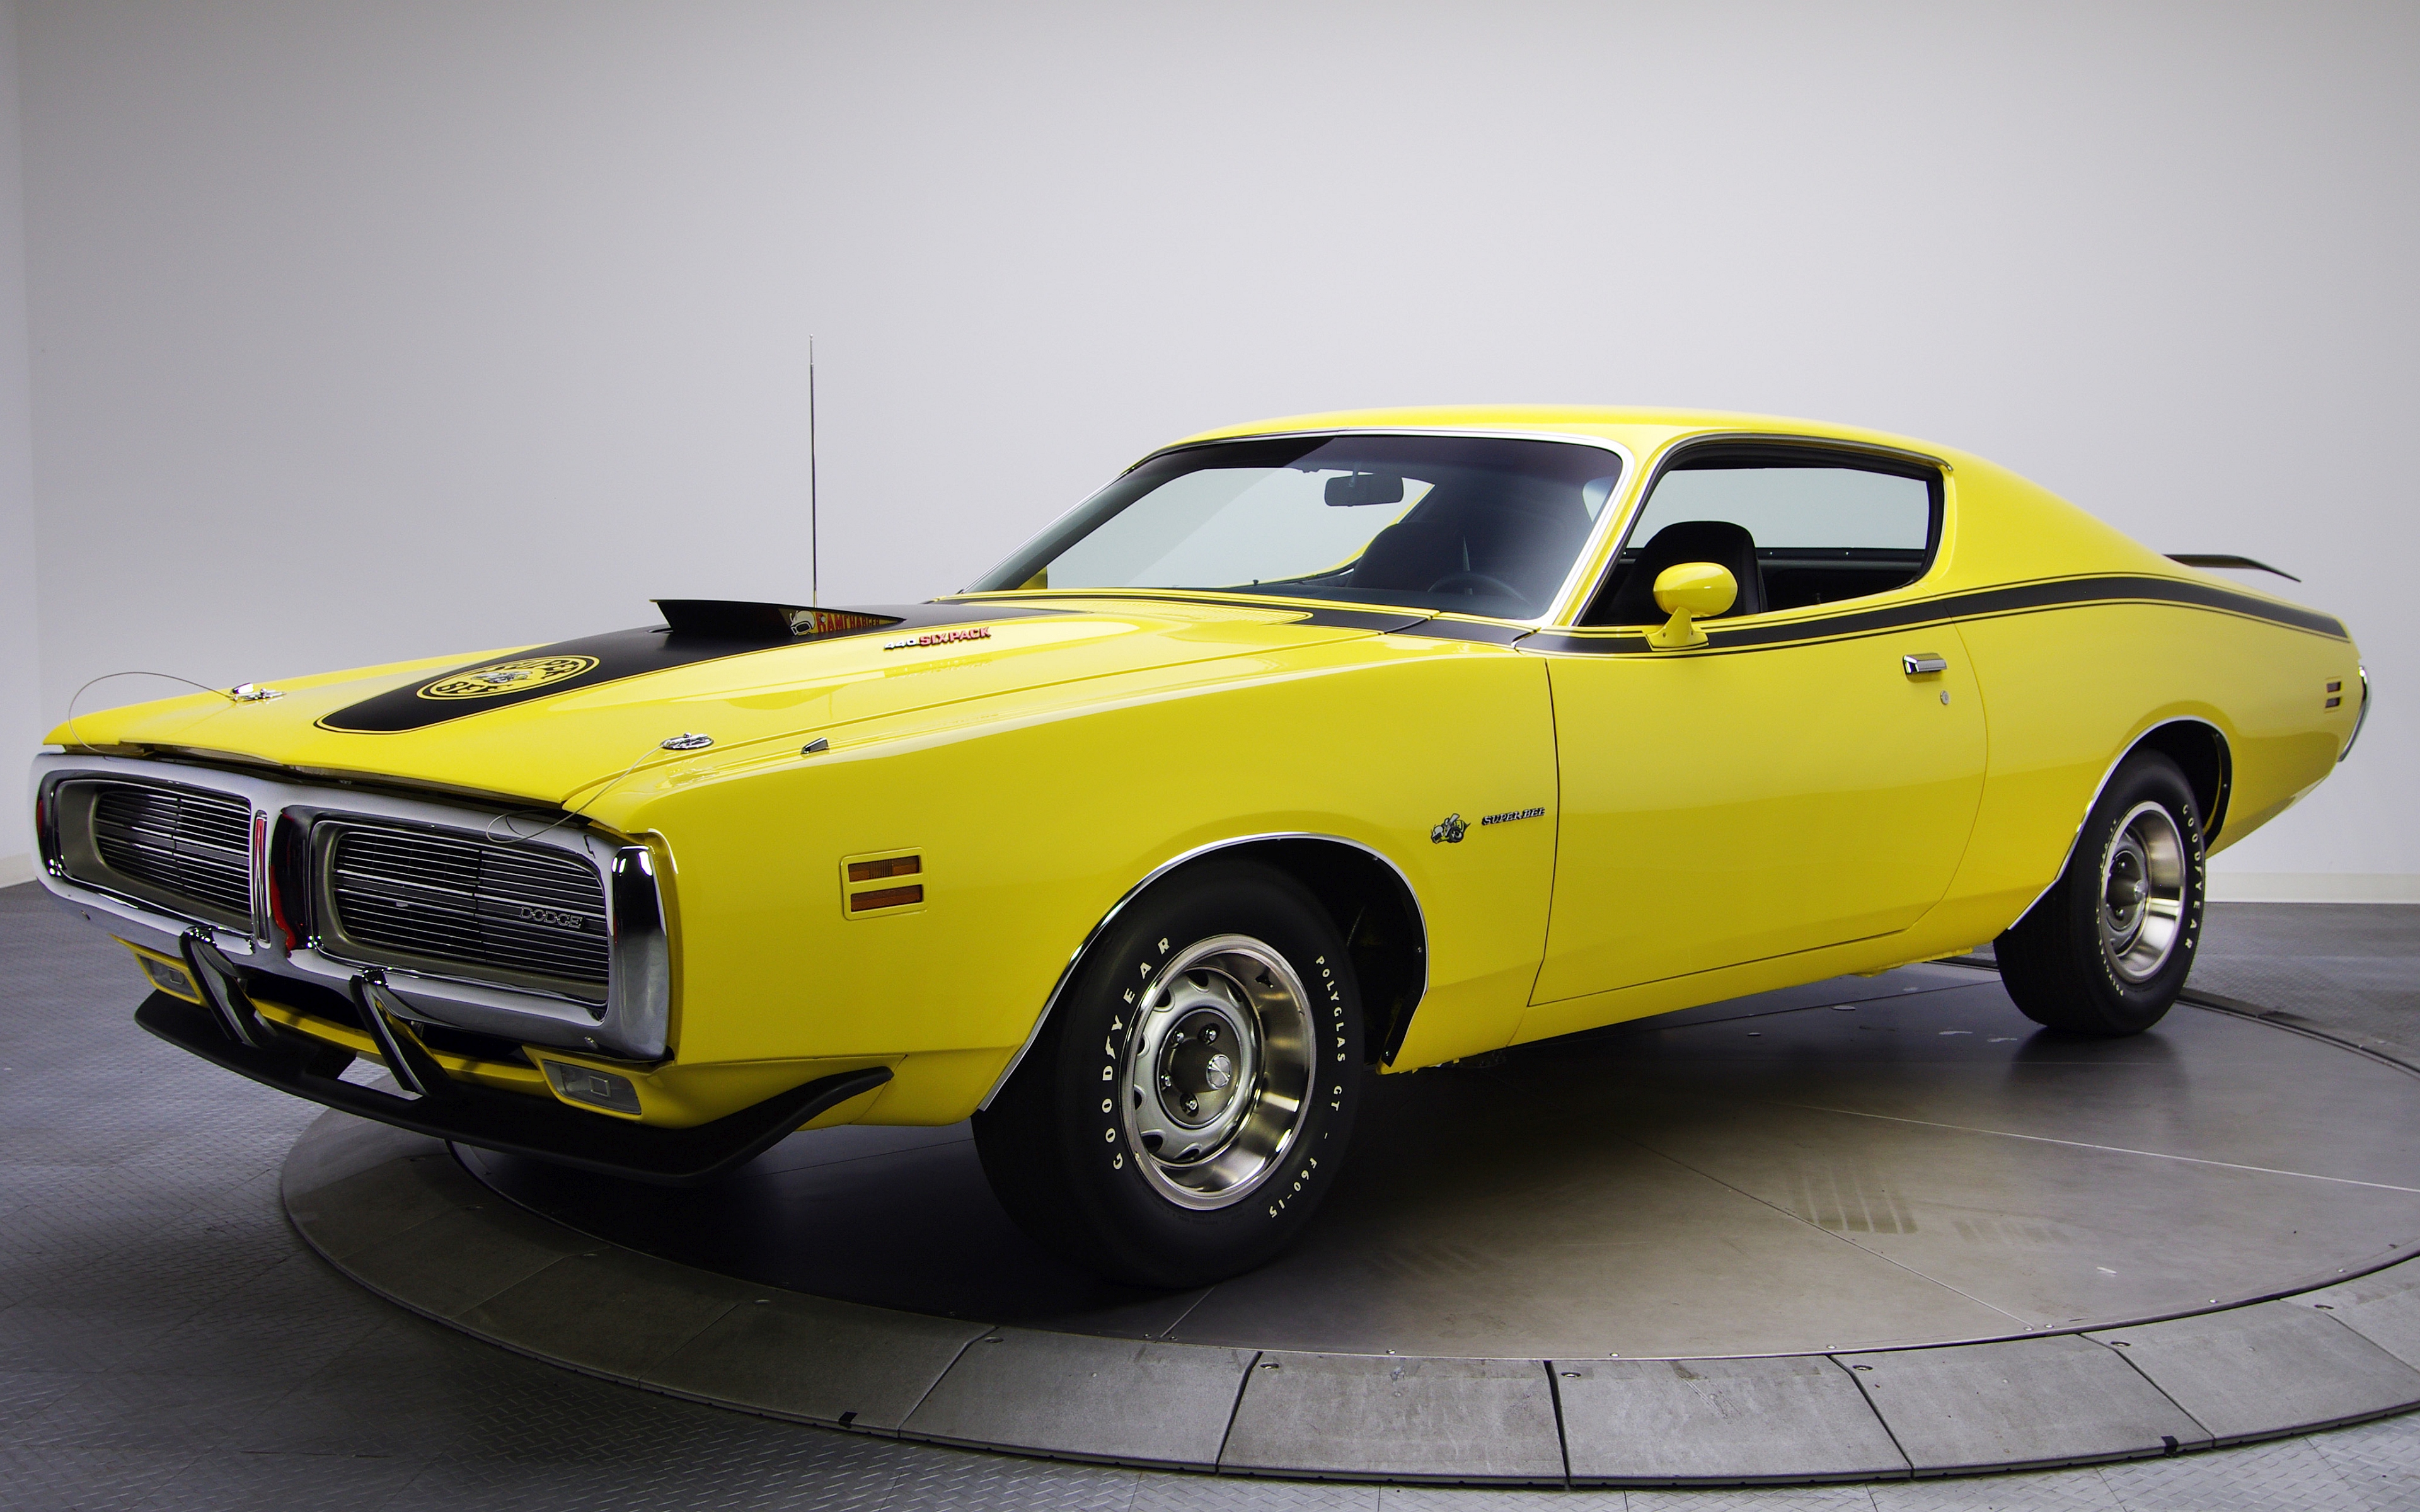 dodge super bee, vehicles, dodge charger, dodge, yellow car